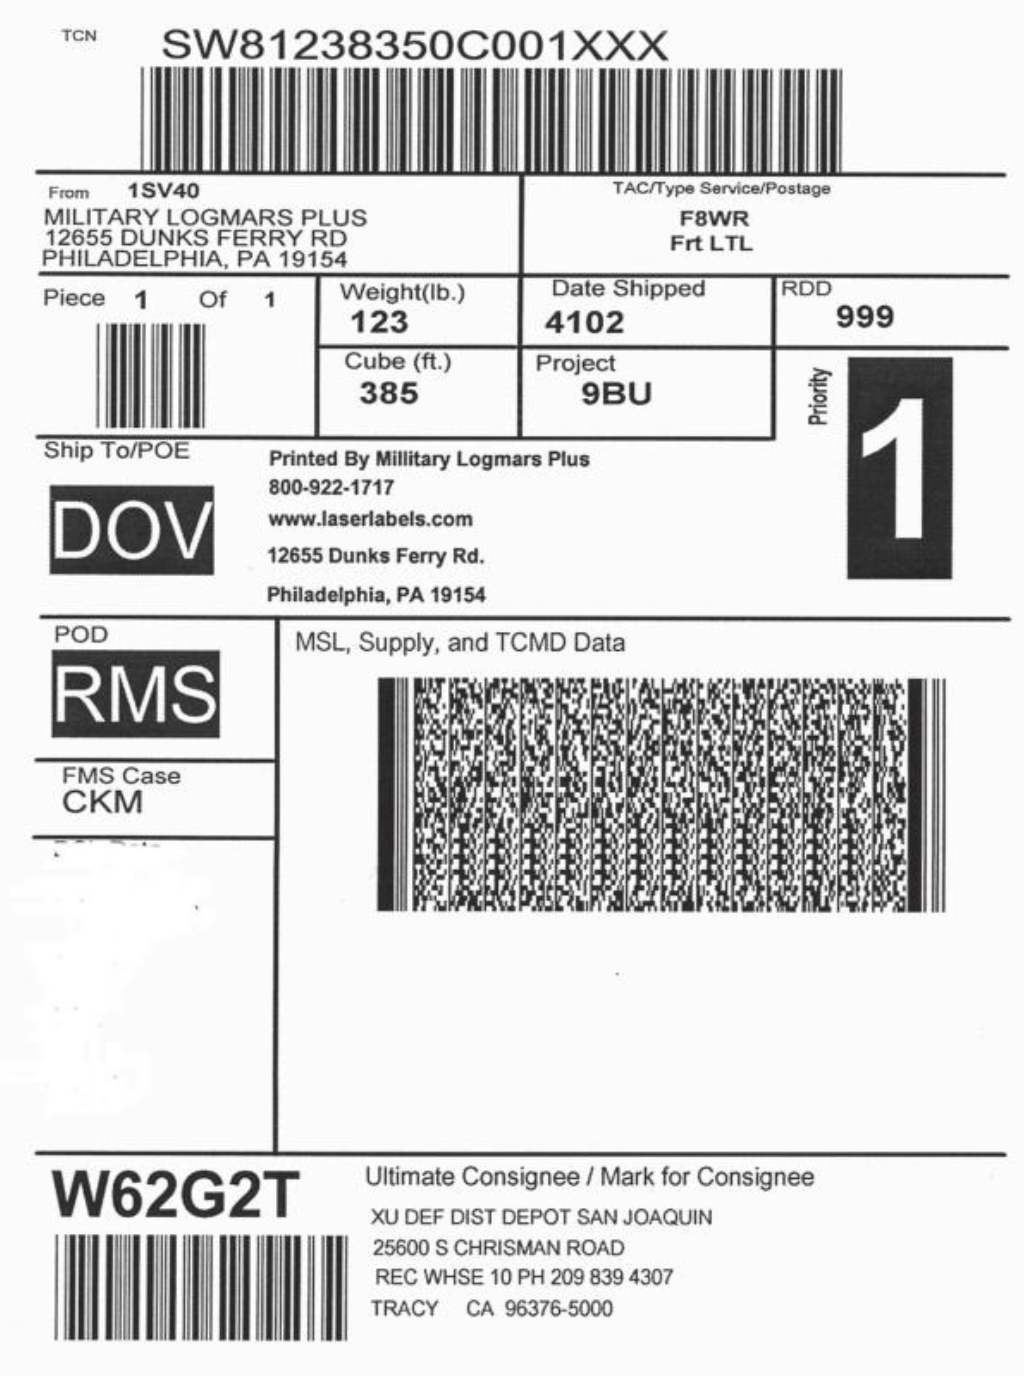 MSL military shipping label